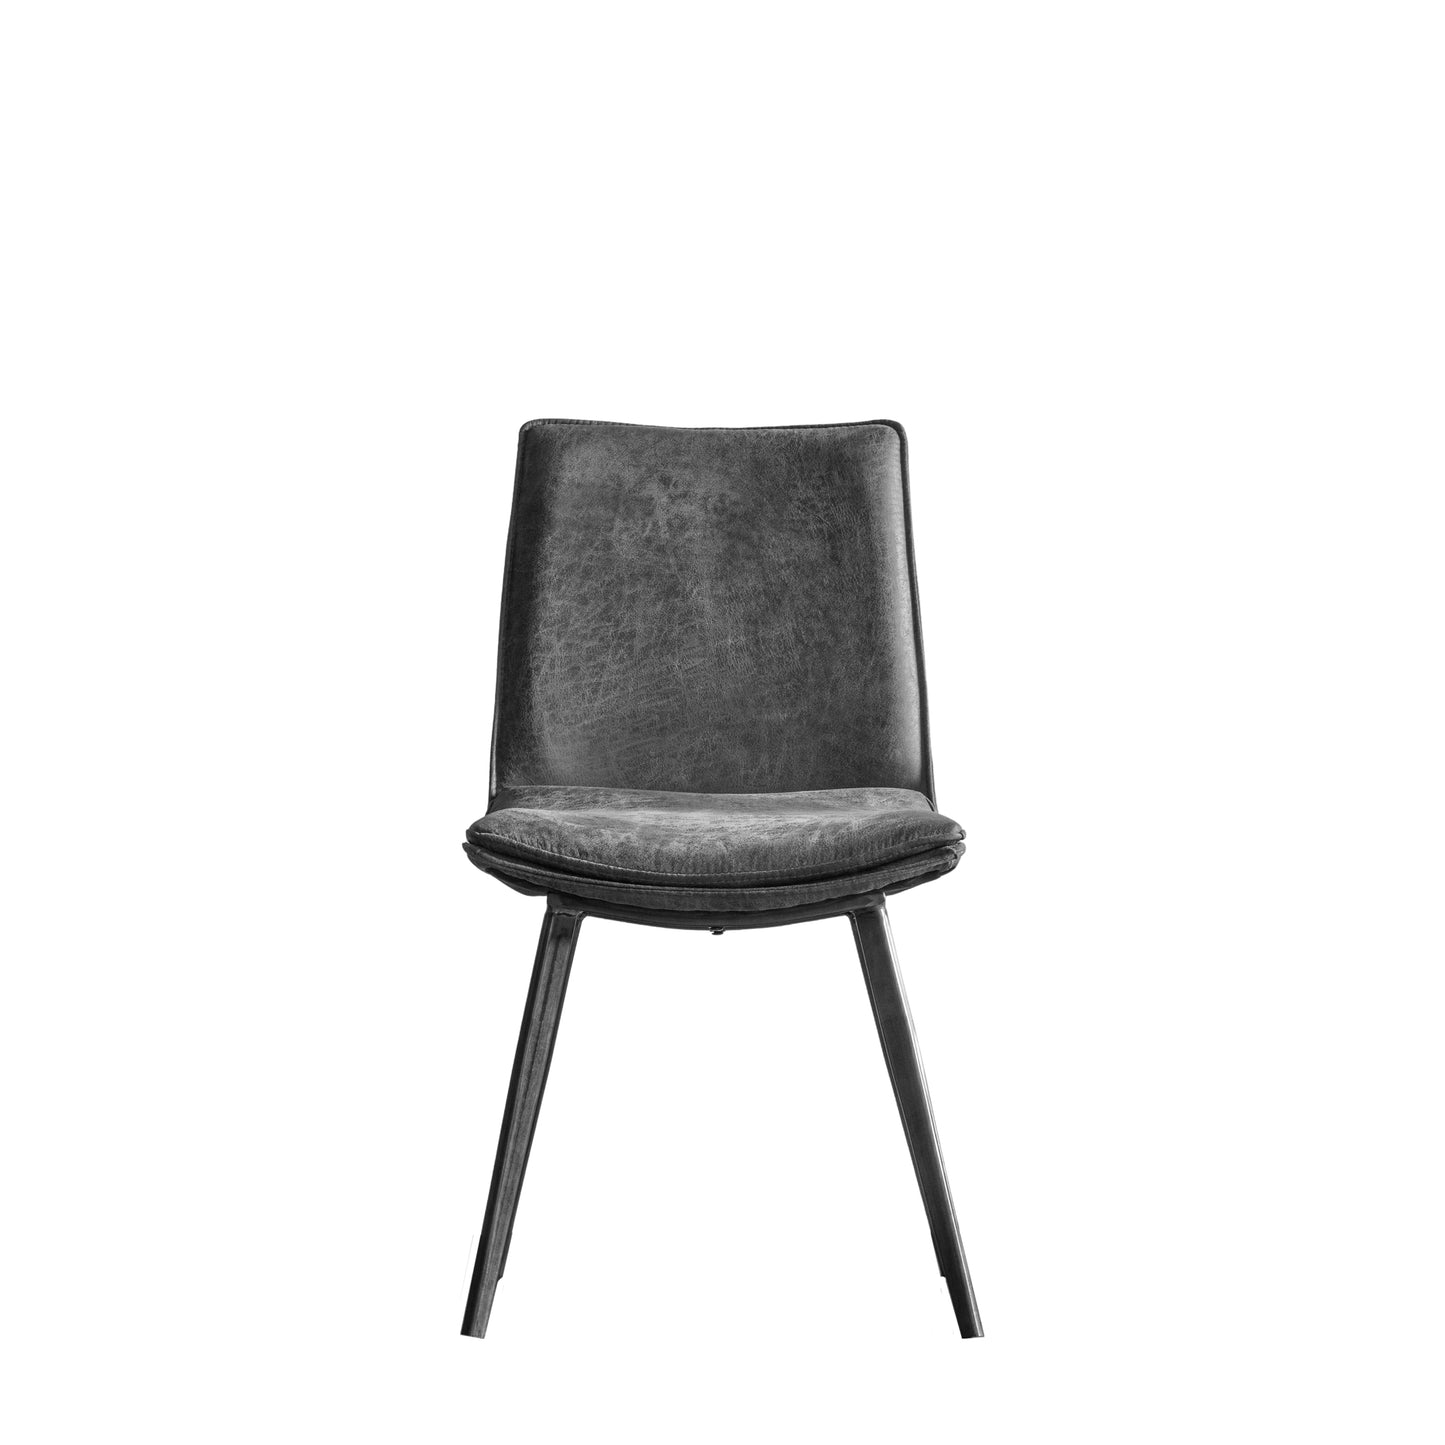 Load image into Gallery viewer, A Hinks Chair Grey (2pk) for interior decor on a white background.
